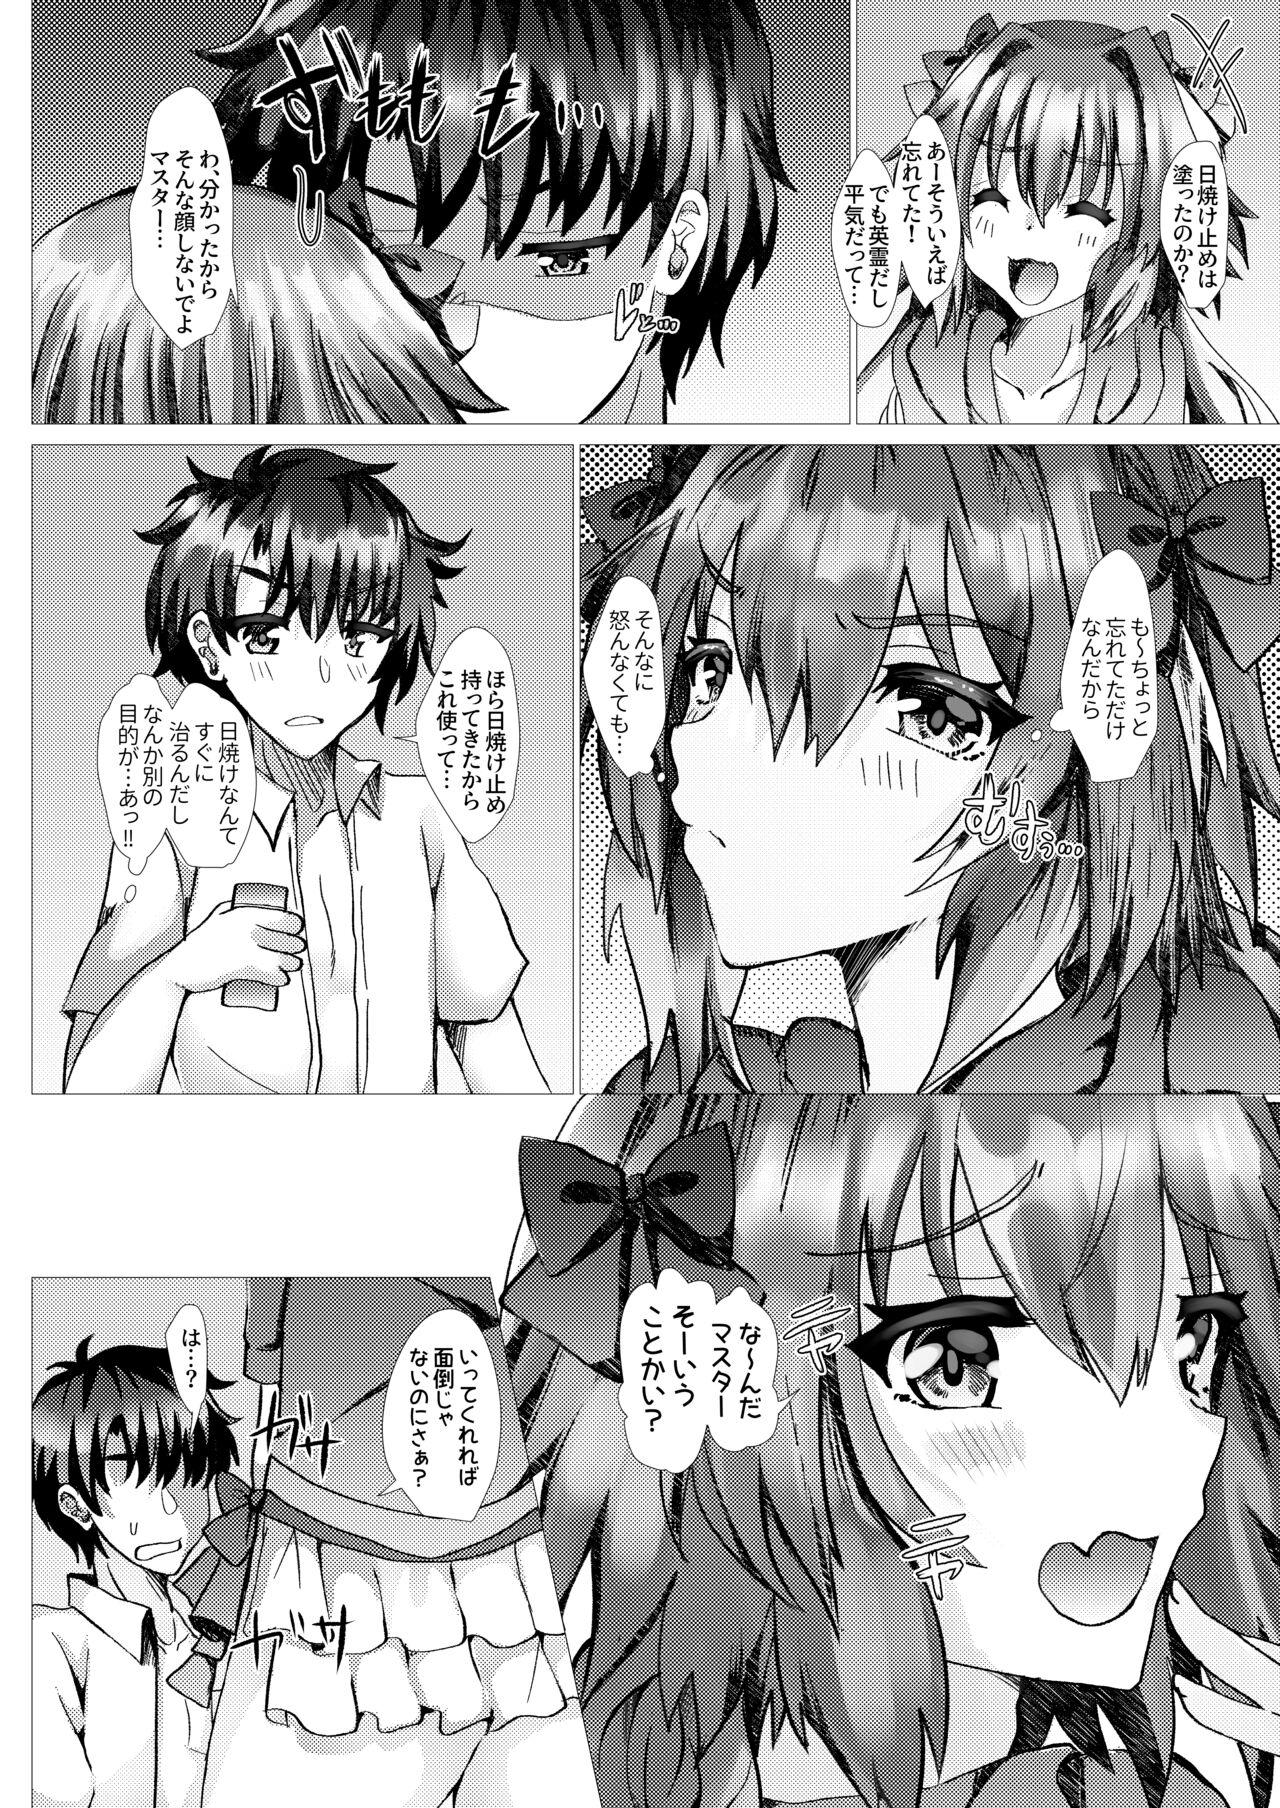 Sex Party Astolfo to Summer Vacation + Omake - Fate grand order Caught - Page 3